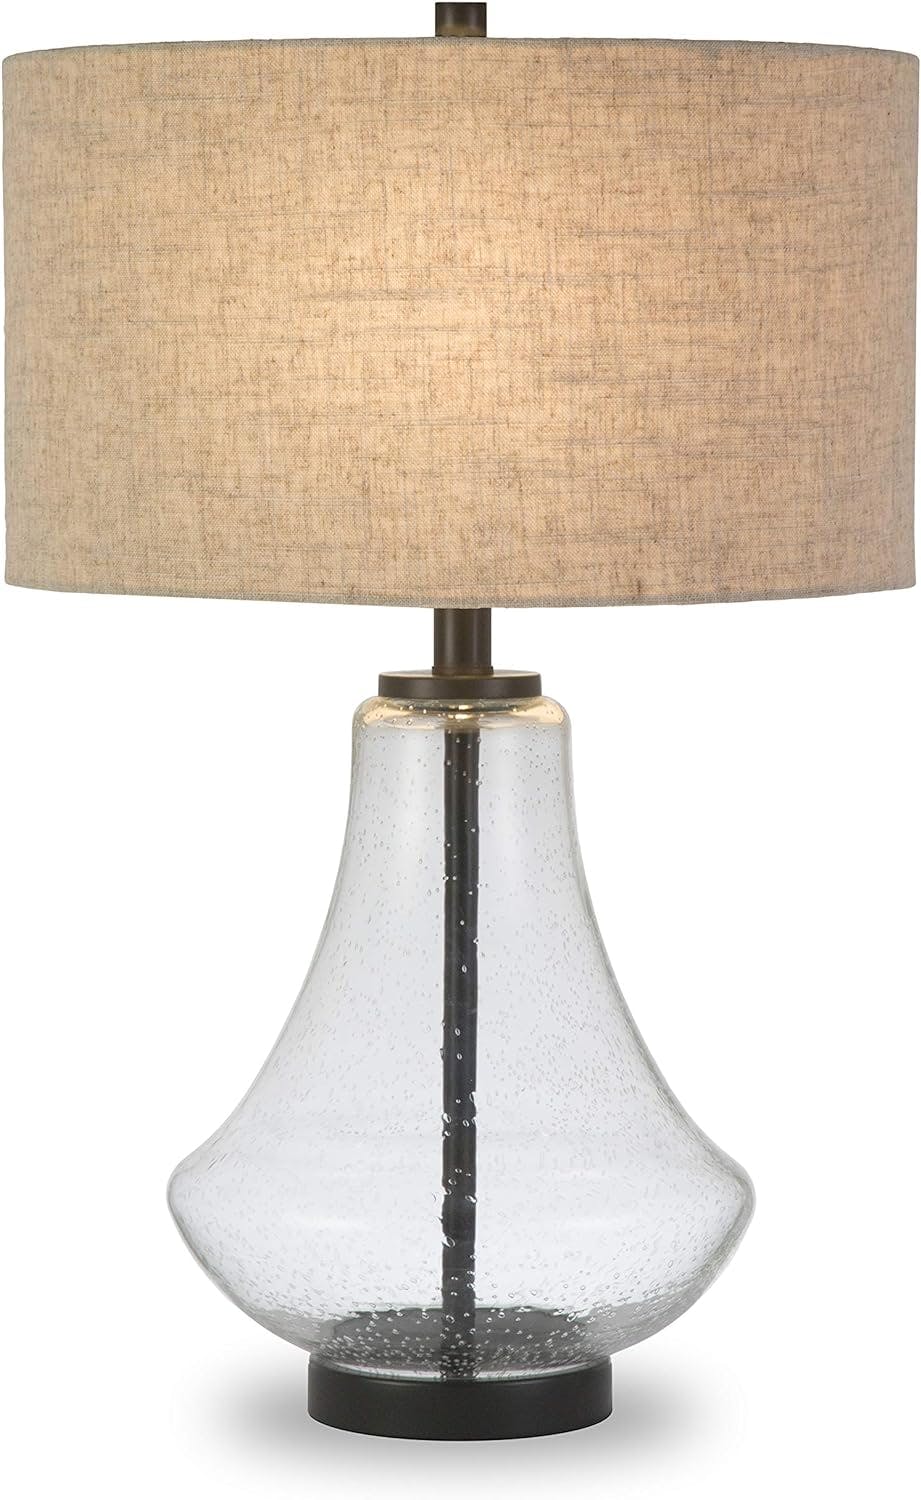 Lagos Seeded Glass 23" Tall Table Lamp with Antique Bronze Finish and Flax Shade